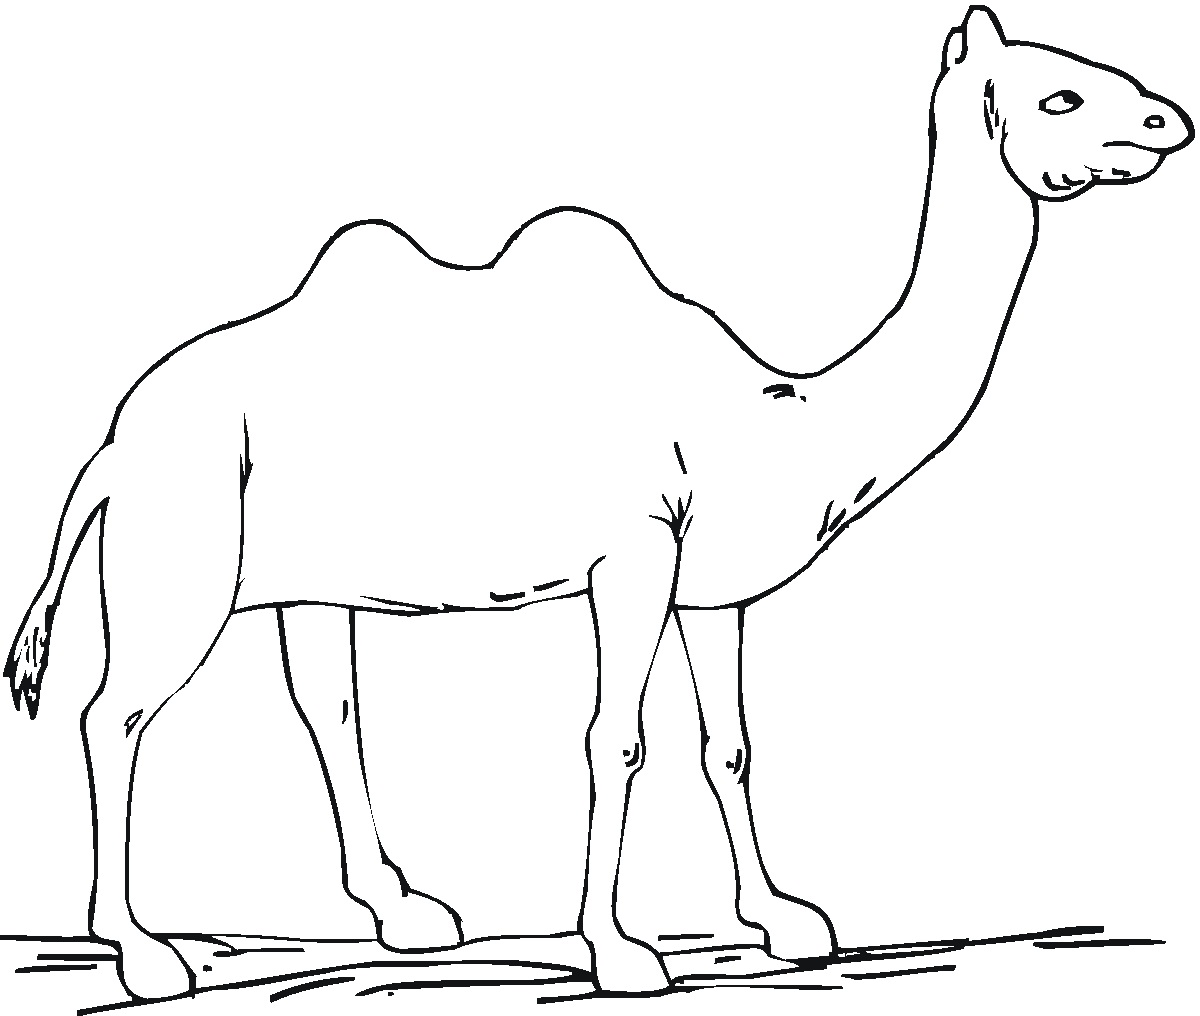 camel-coloring-page-for-kids-pictures-animal-place